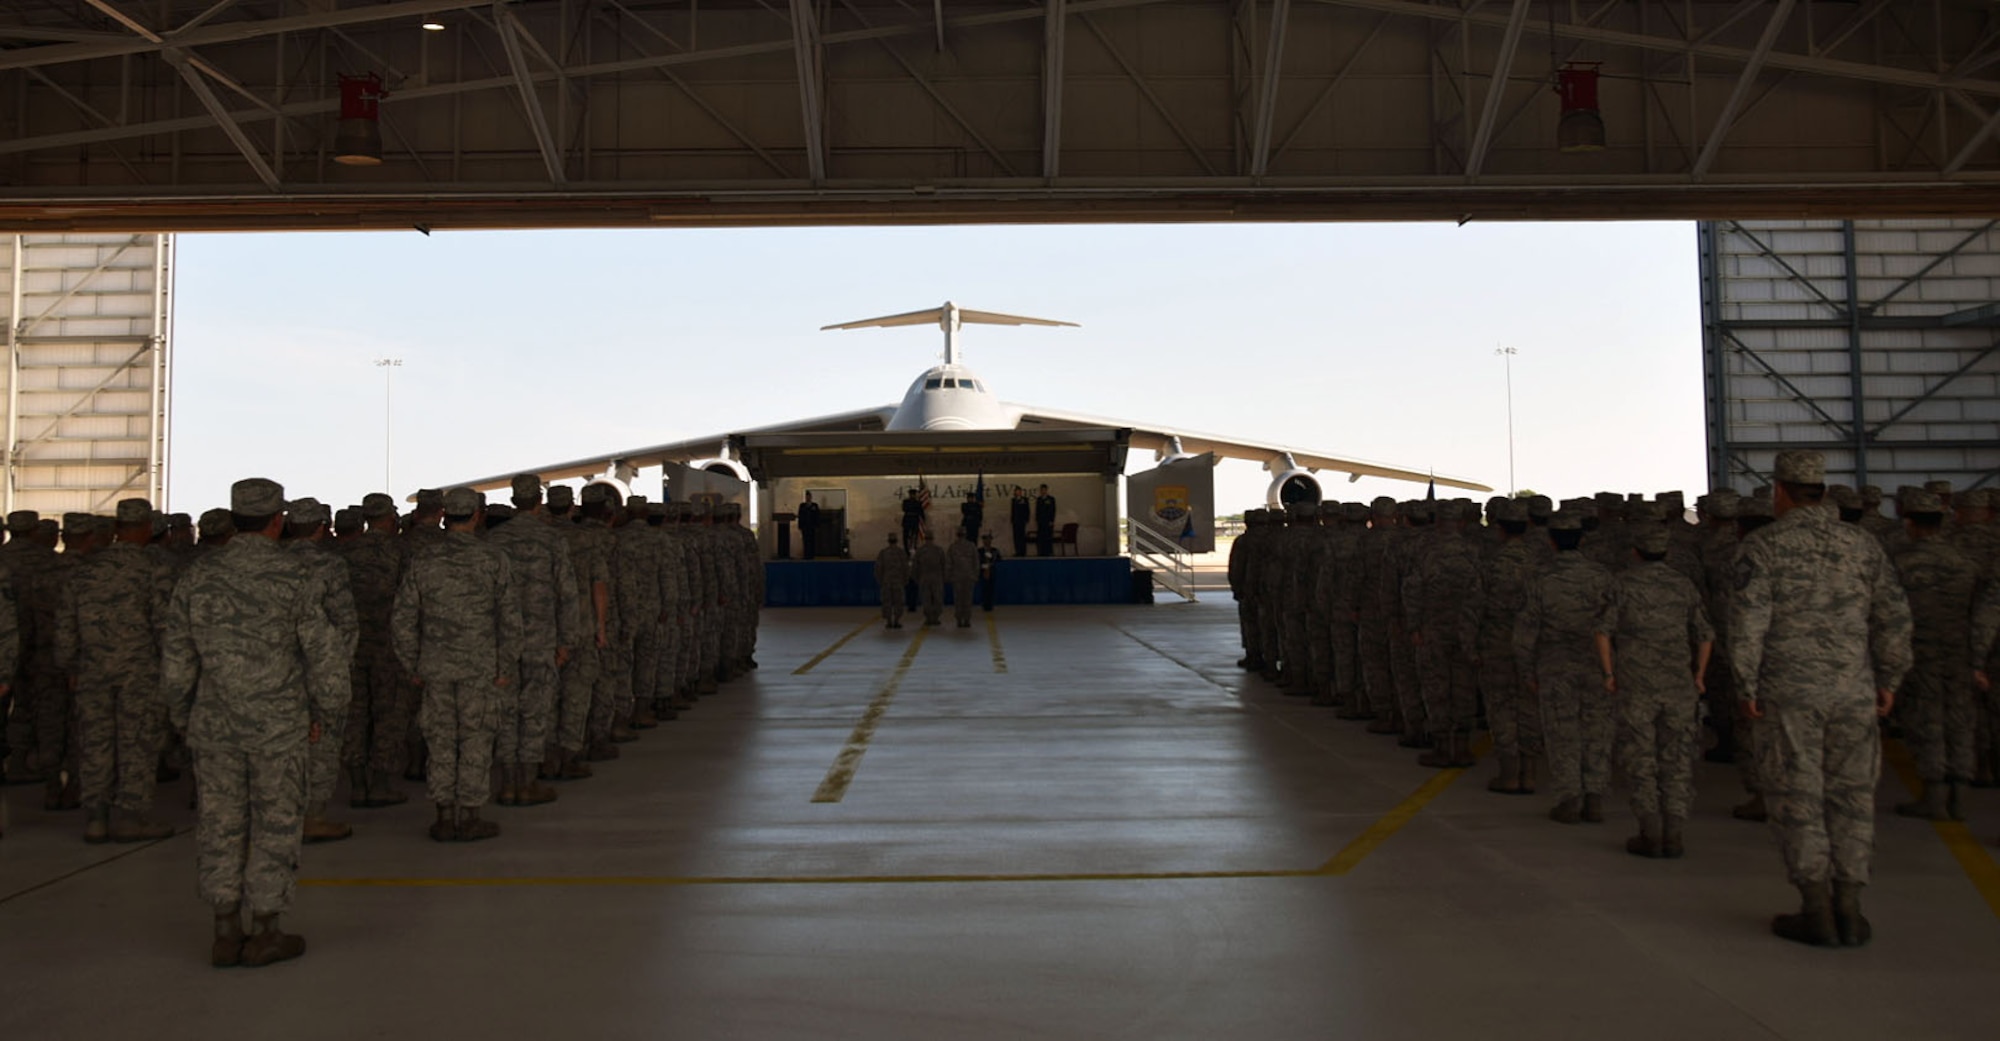 Lt. Col. Charles V. Pratt, 433rd Maintenance Group commander, assumes command in a ceremony held in a maintenance hangar at Joint Base San Antonio-Lackland July 15, 2017. Pratt’s previous assignment was as deputy group commander and maintenance squadron commander at Moffett Air Field, California. (U.S. Air Force photo/Tech Sgt. Carlos J. Trevino)